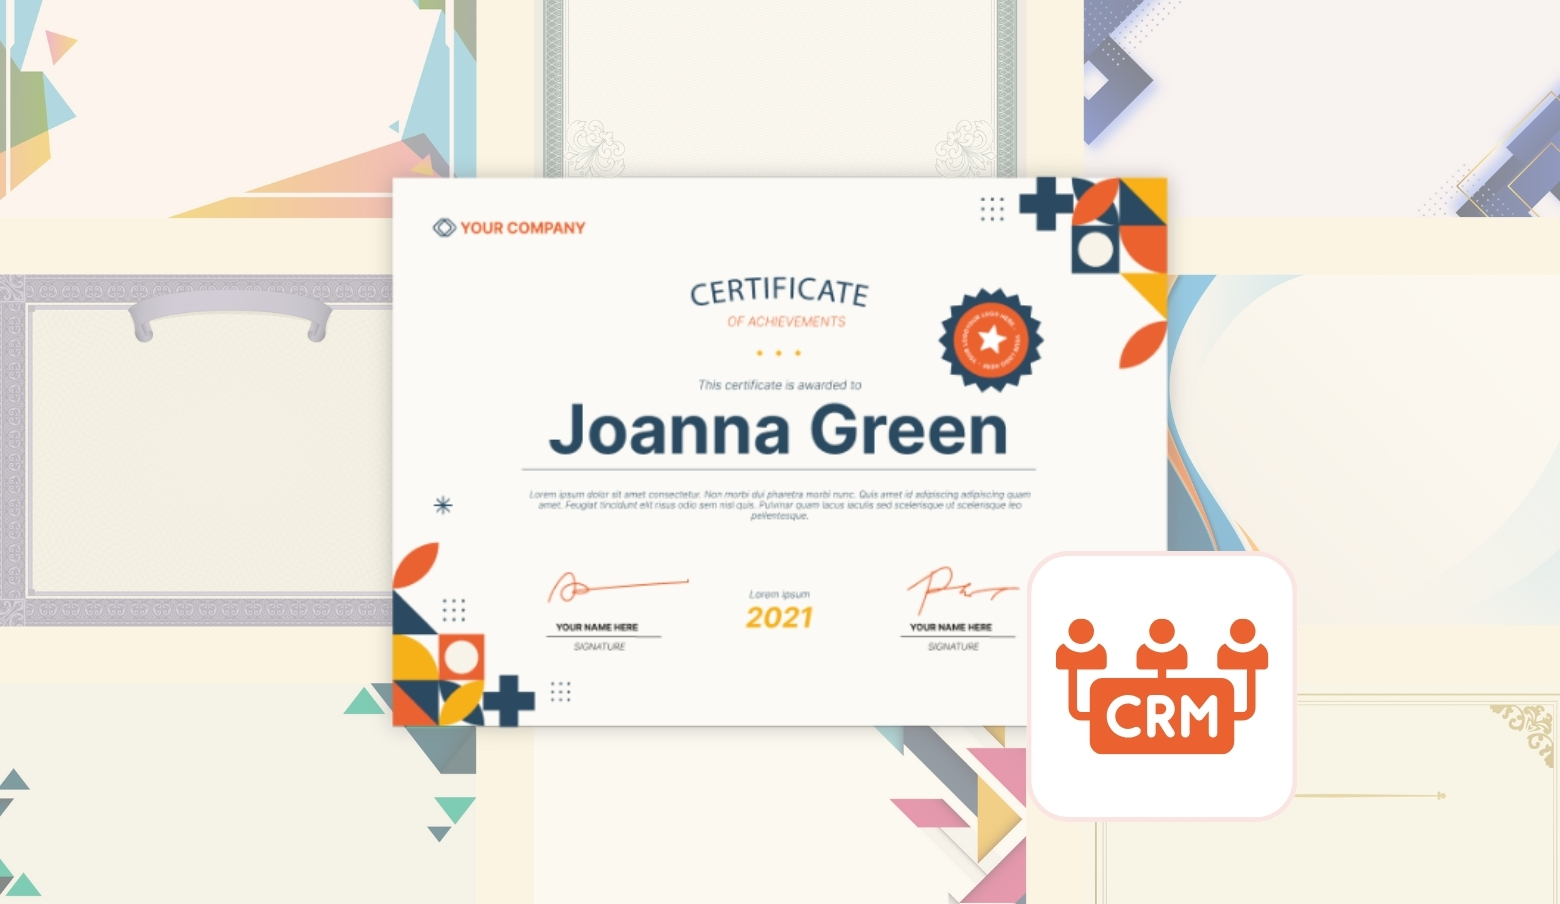 Elevating Customer Service Standards with CRM Certification